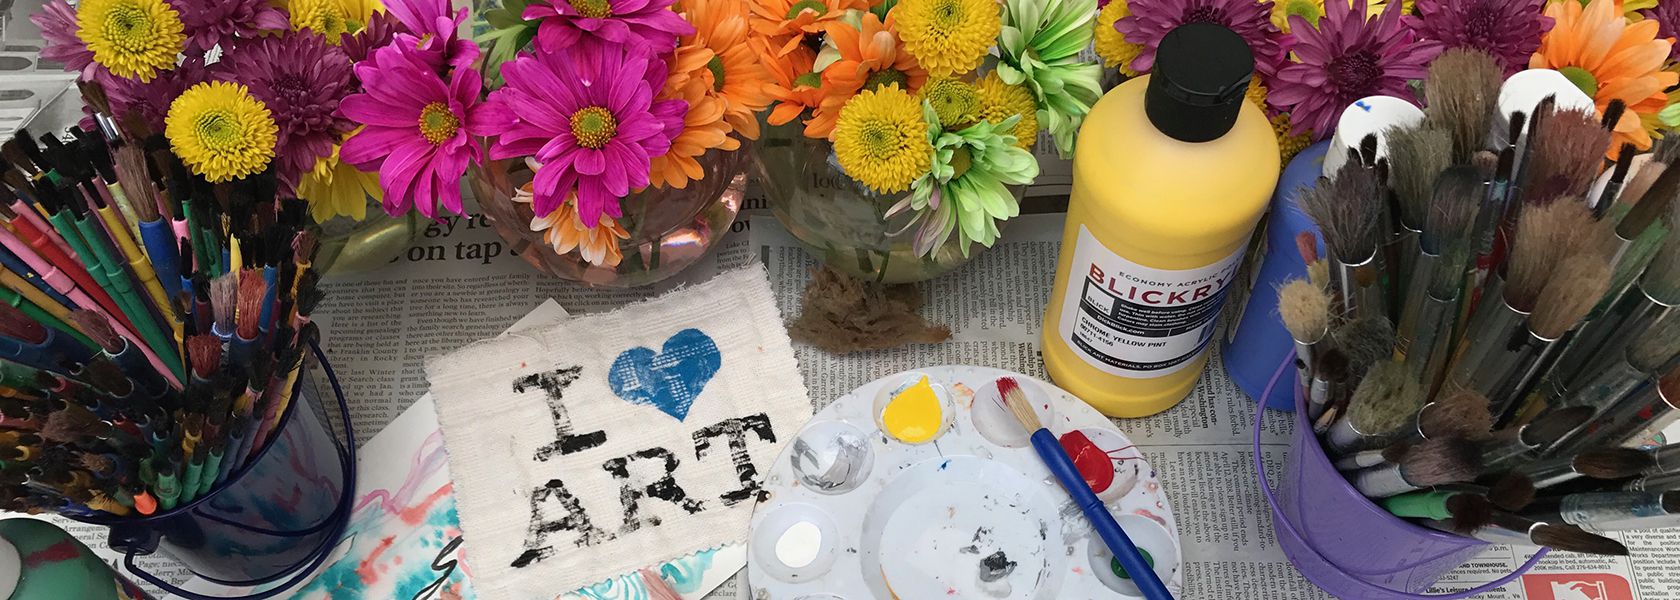 colorful art supplies and flowers on a table with a paper that says 